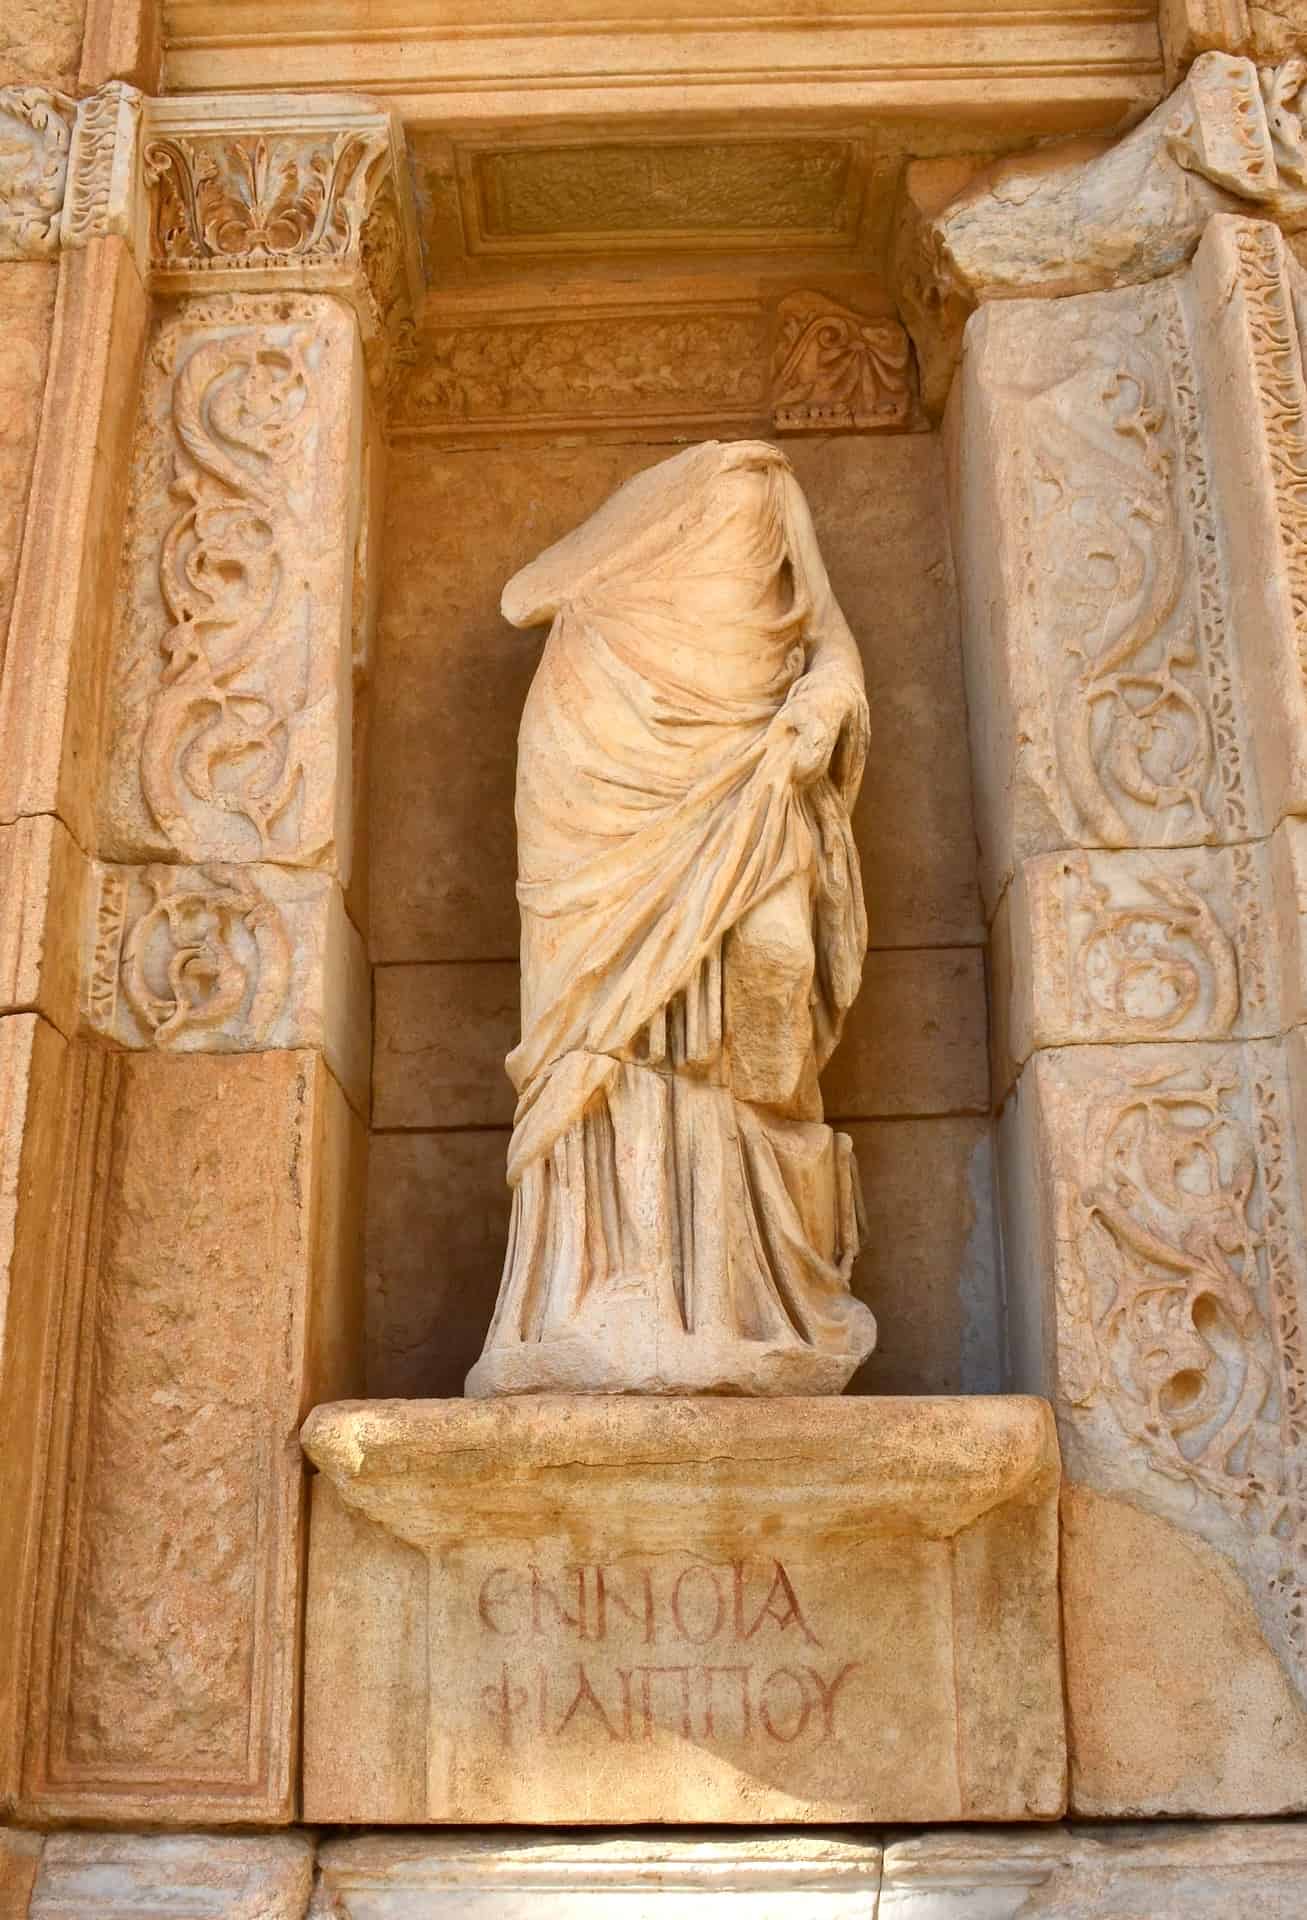 Statue of Ennoia on the Library of Celsus